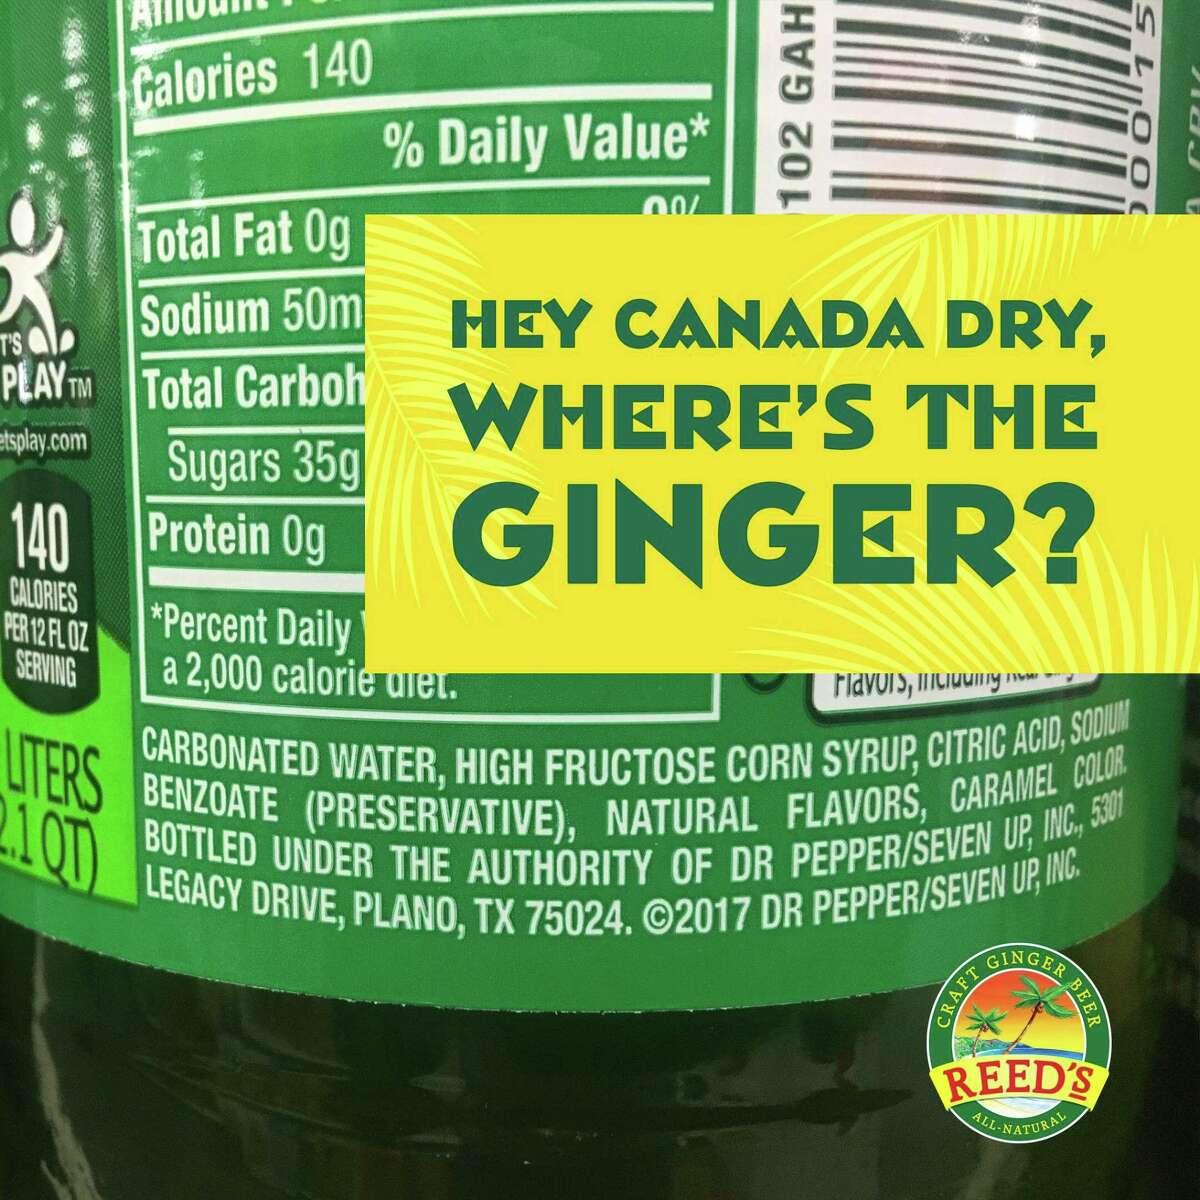 A promotional image issued by Reed's as part of a campaign to contrast the Norwalk company's ginger beer with that sold by the Canada Dry division of Dr Pepper/Seven Up. (Press image via Reed's)